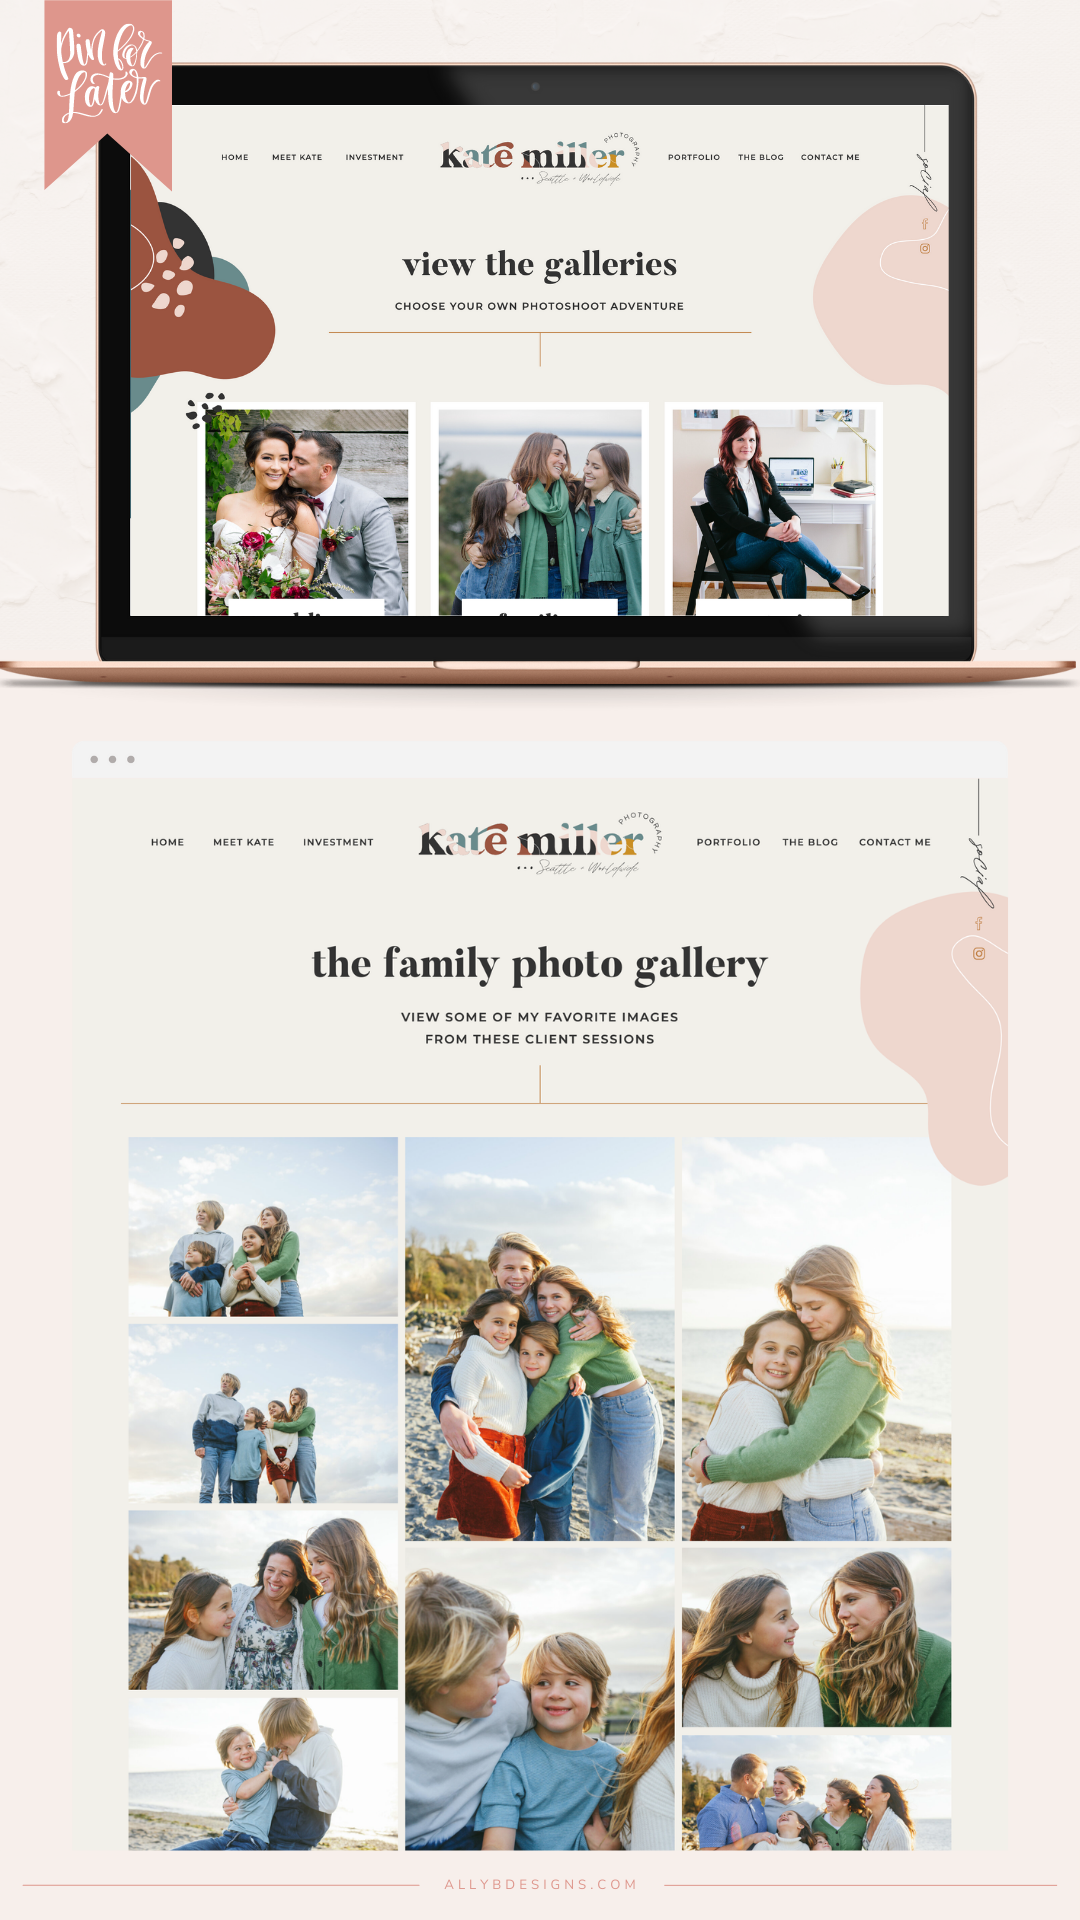 Client Launch: A Wedding Photographer Website Portfolio and Brand for Kate Miller Photography by Ally B Designs